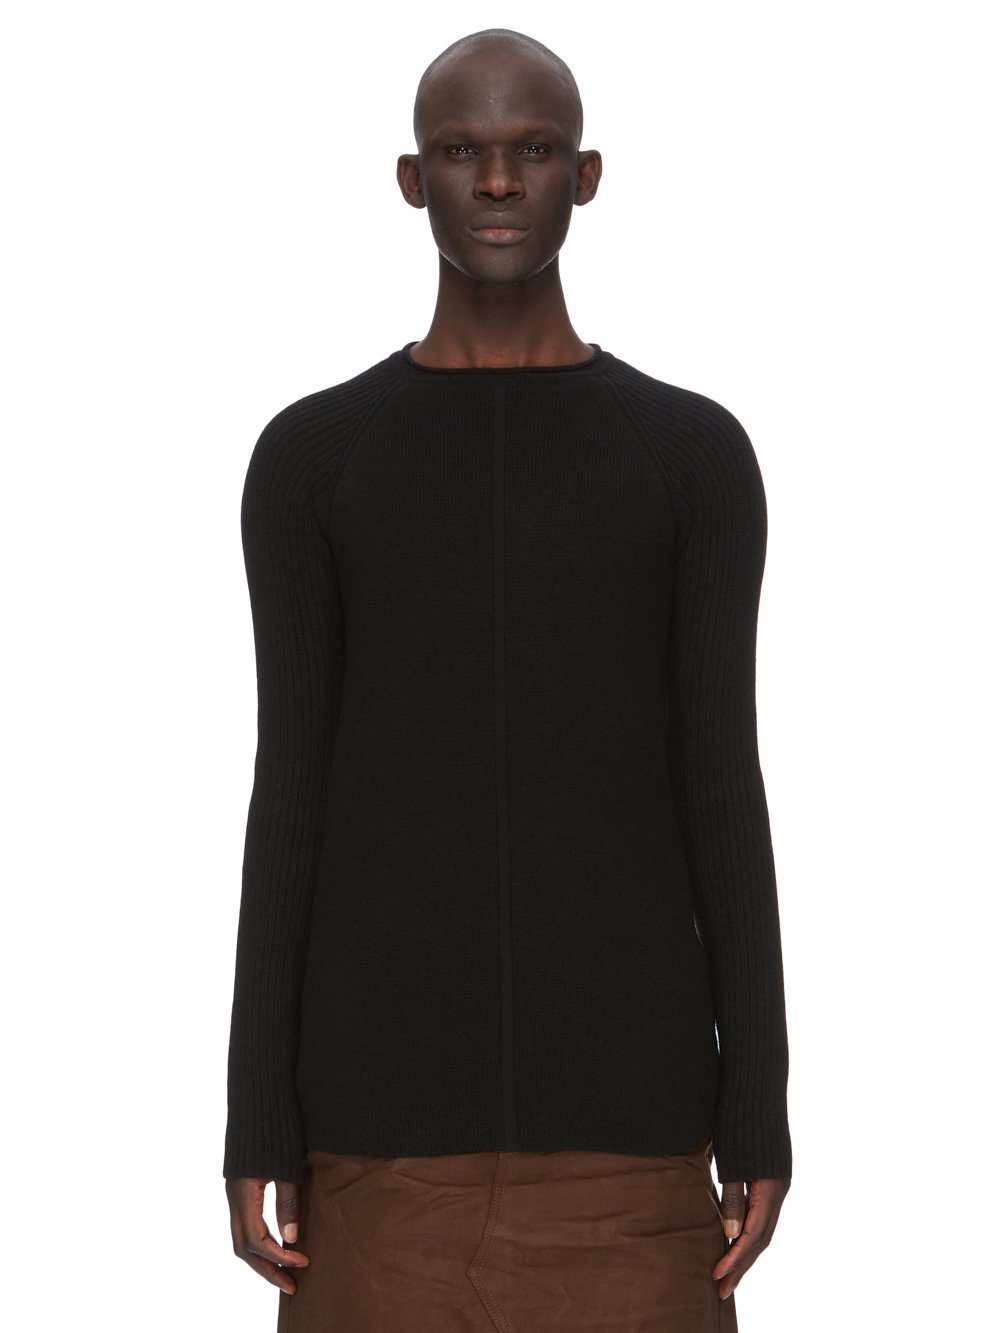 RICK OWENS FW23 LUXOR RUNWAY PULL IN BLACK RECYCLED CASHMERE